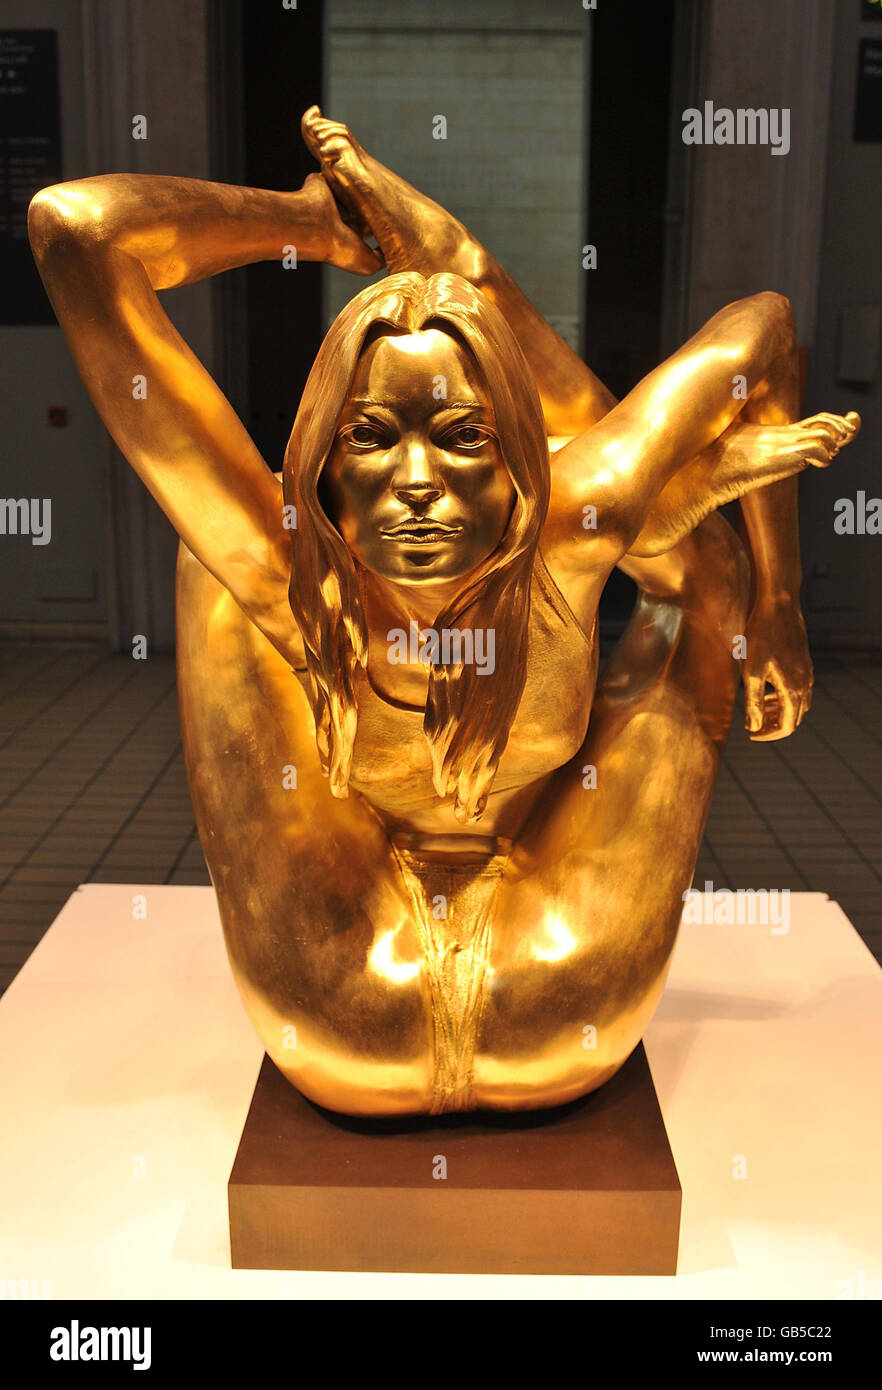 A 50kg solid gold statue of supermodel Kate Moss in a yogic pose called 'Siren' is unveiled at the opening of the 'Statuephilia' exhibition at the British Museum in London. Stock Photo